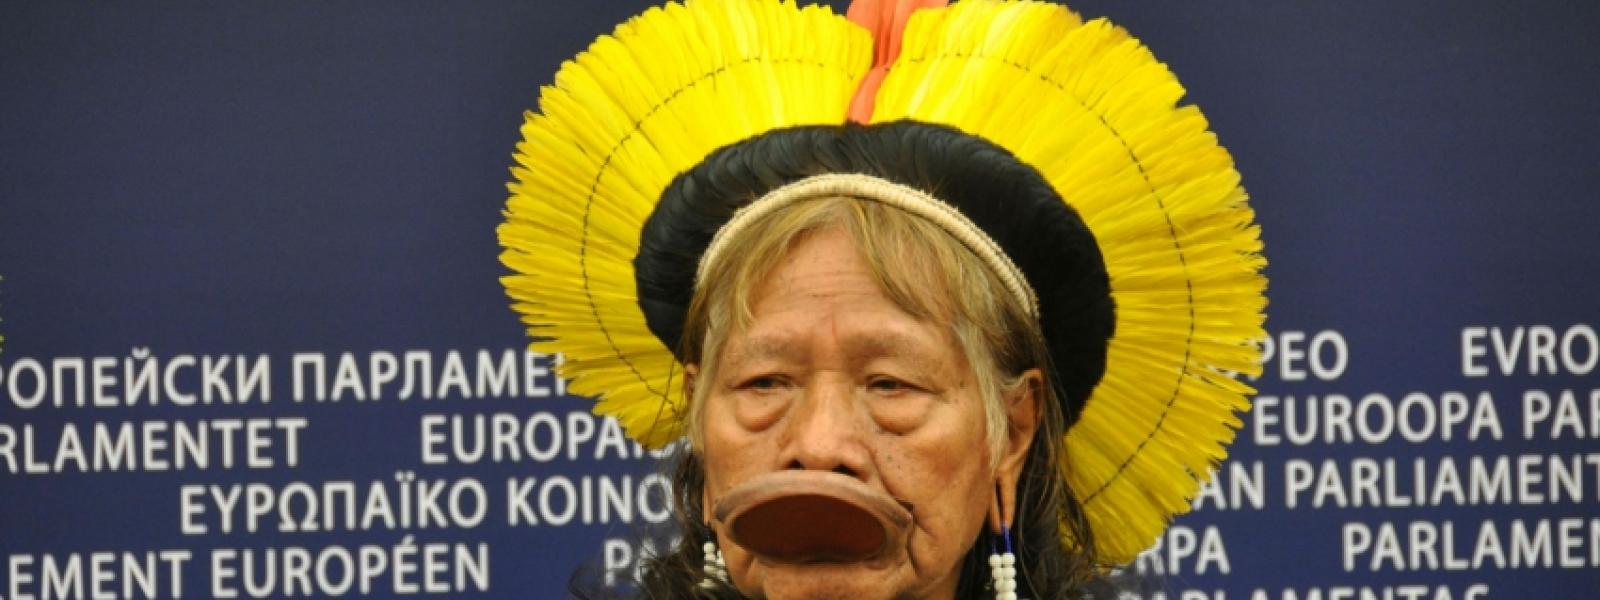 Chief Raoni denounced the threats Belo Monte posted to human rights